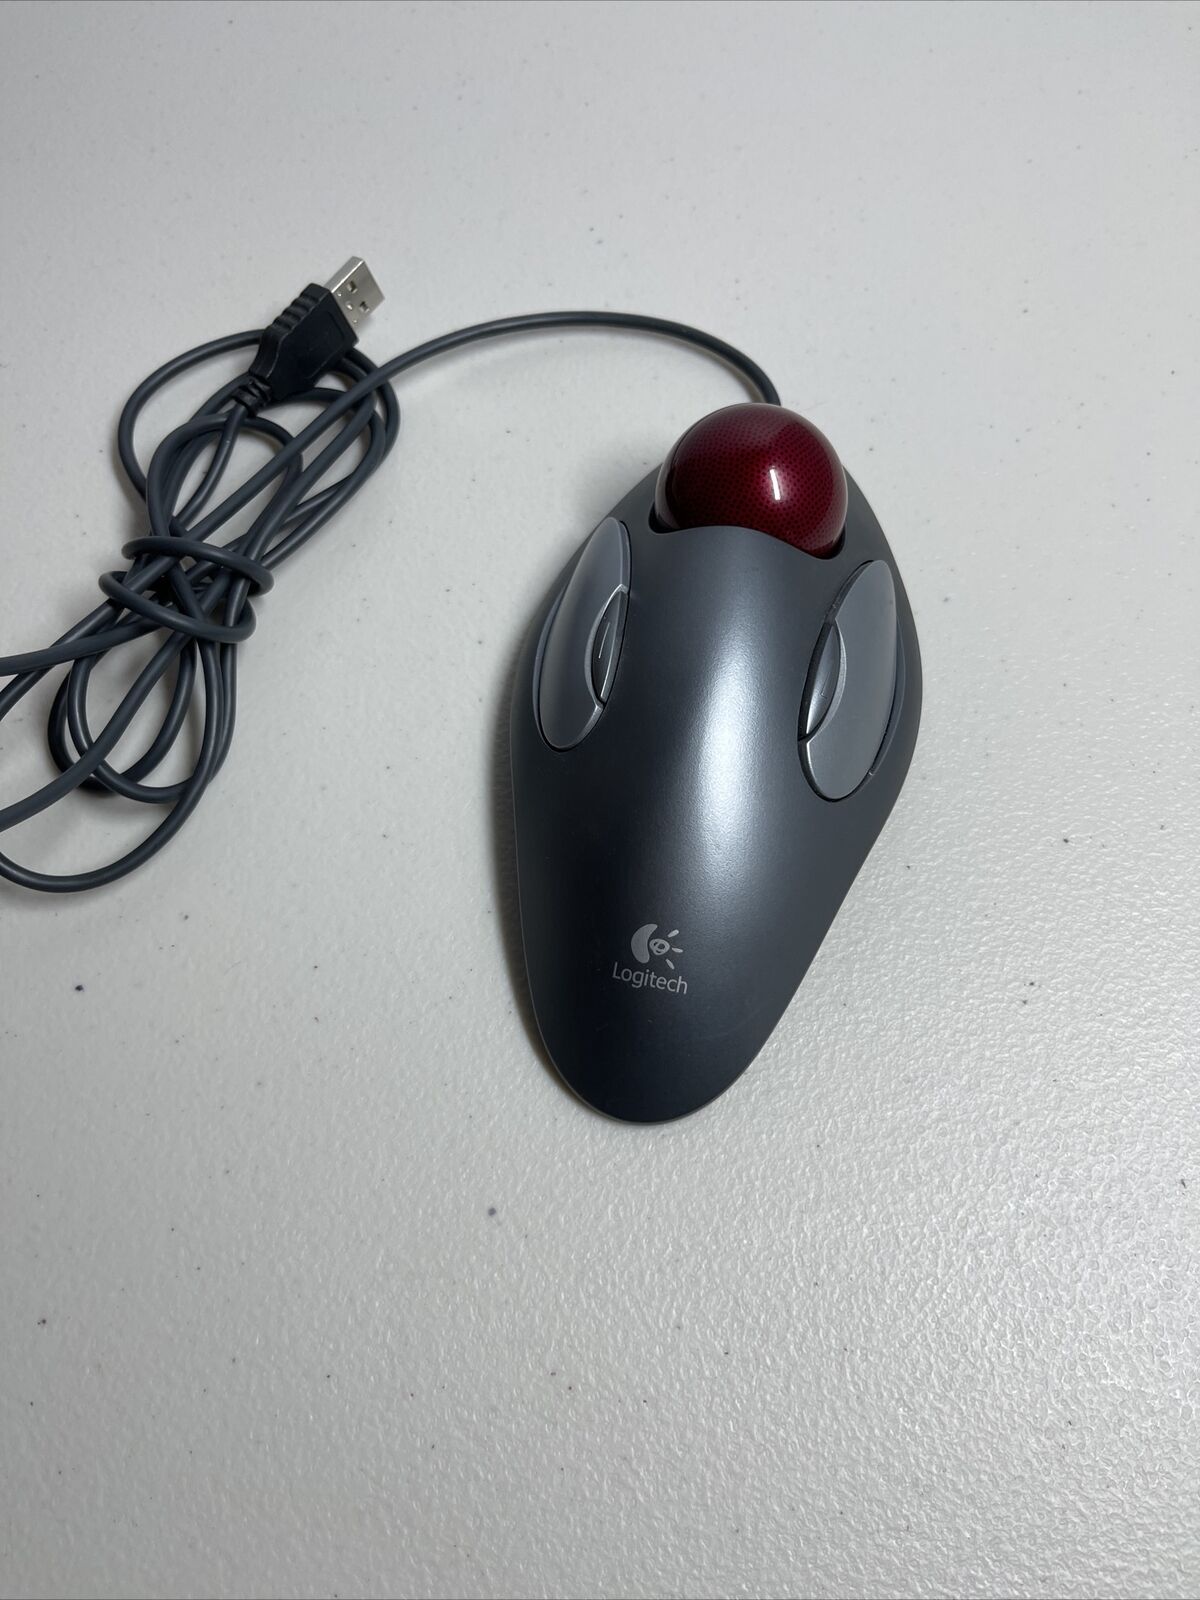 Logitech T-BC21 USB Wired Optical Trackman Marble Mouse Trackball